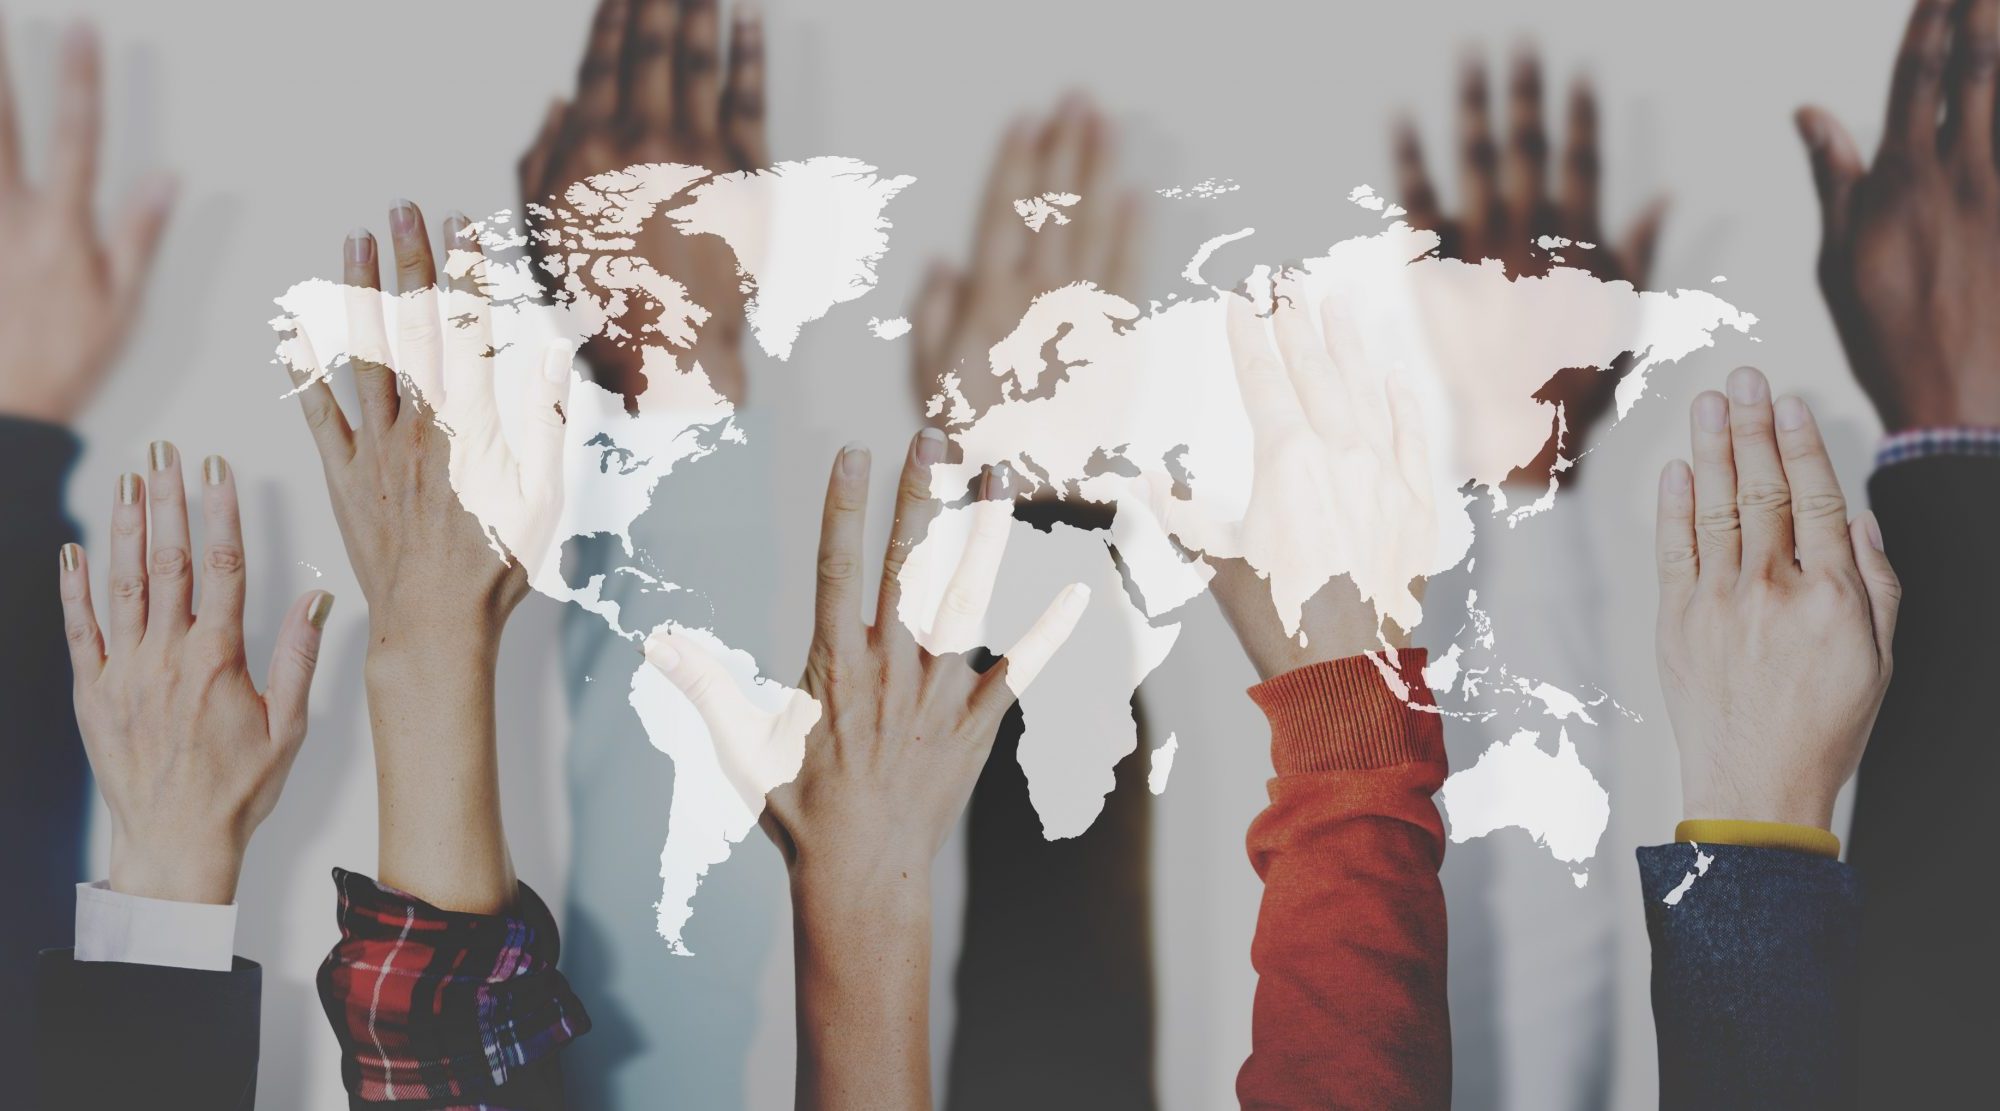 Hands up in the air against a map of the world. Business Impact article for today's education: global commodity and catalyst for cultural diversity